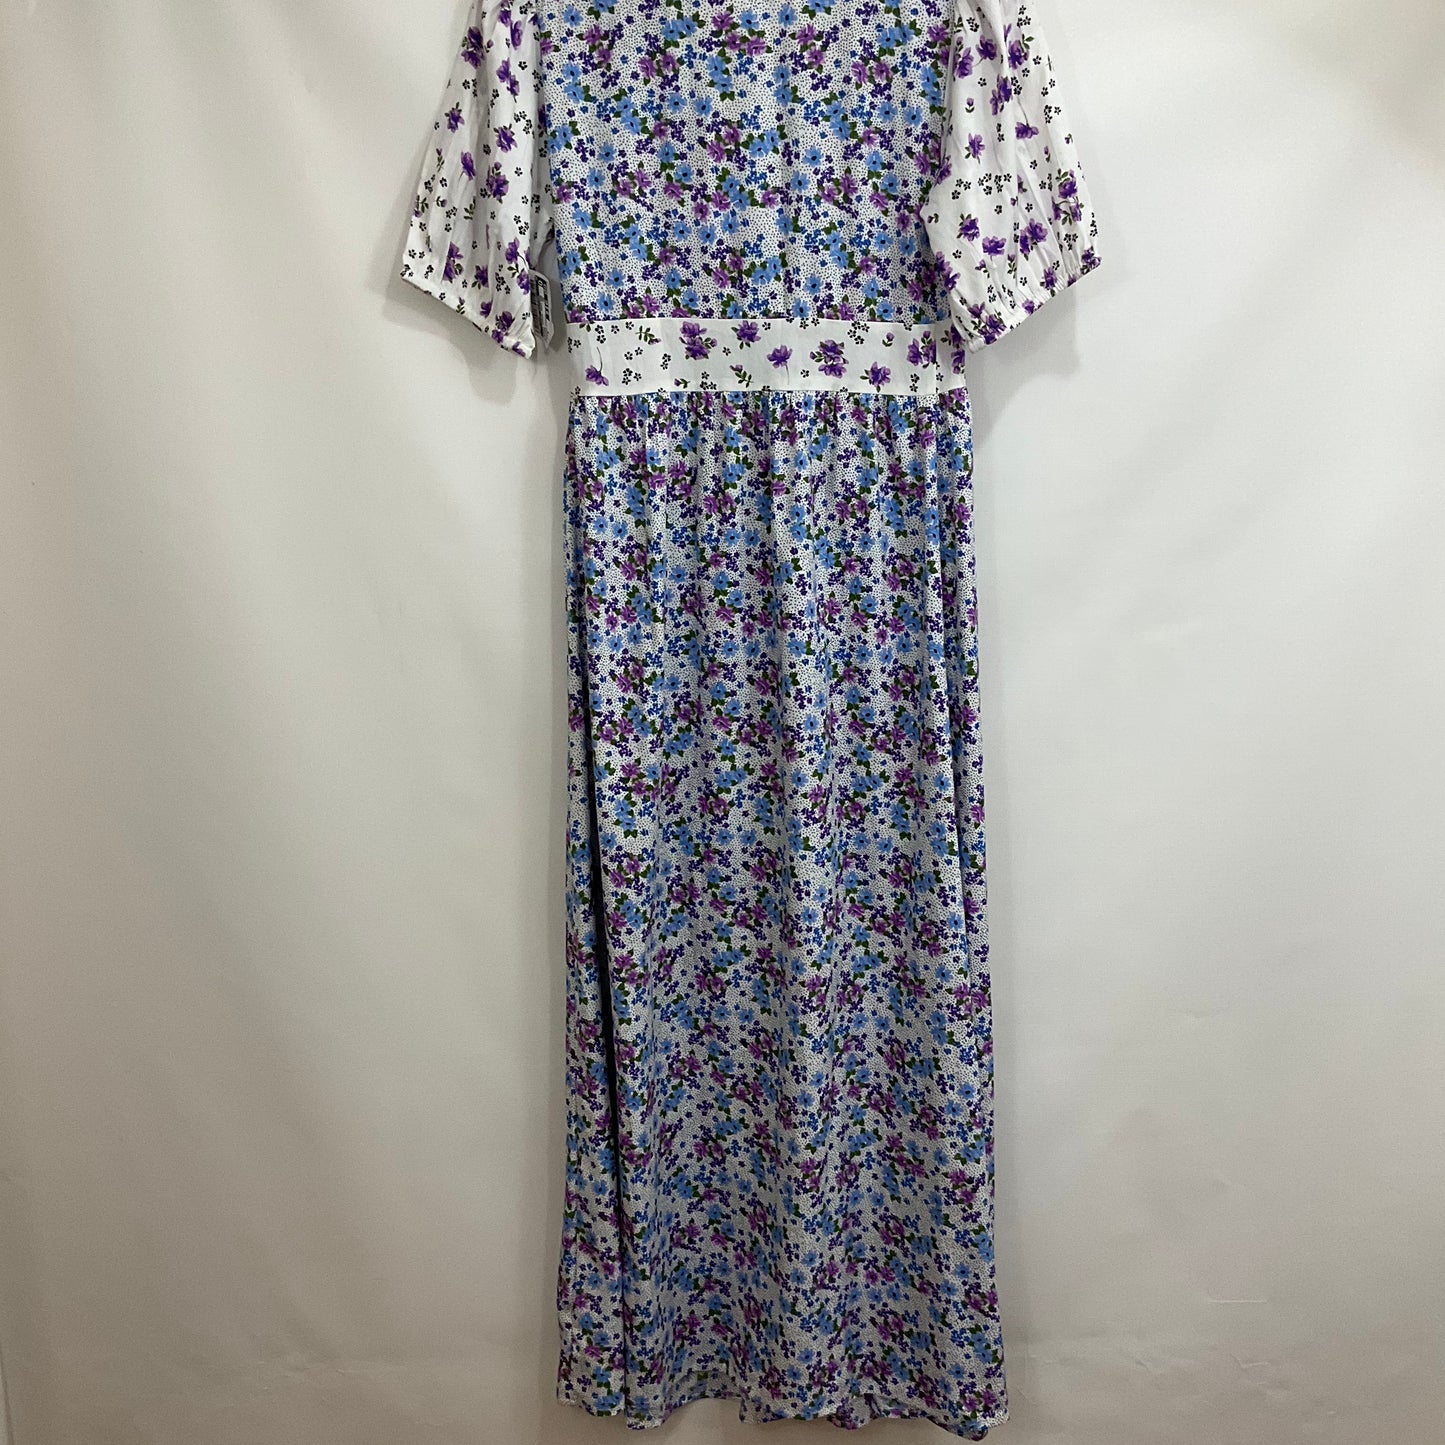 Dress Casual Maxi By Violet Romance Size: 8